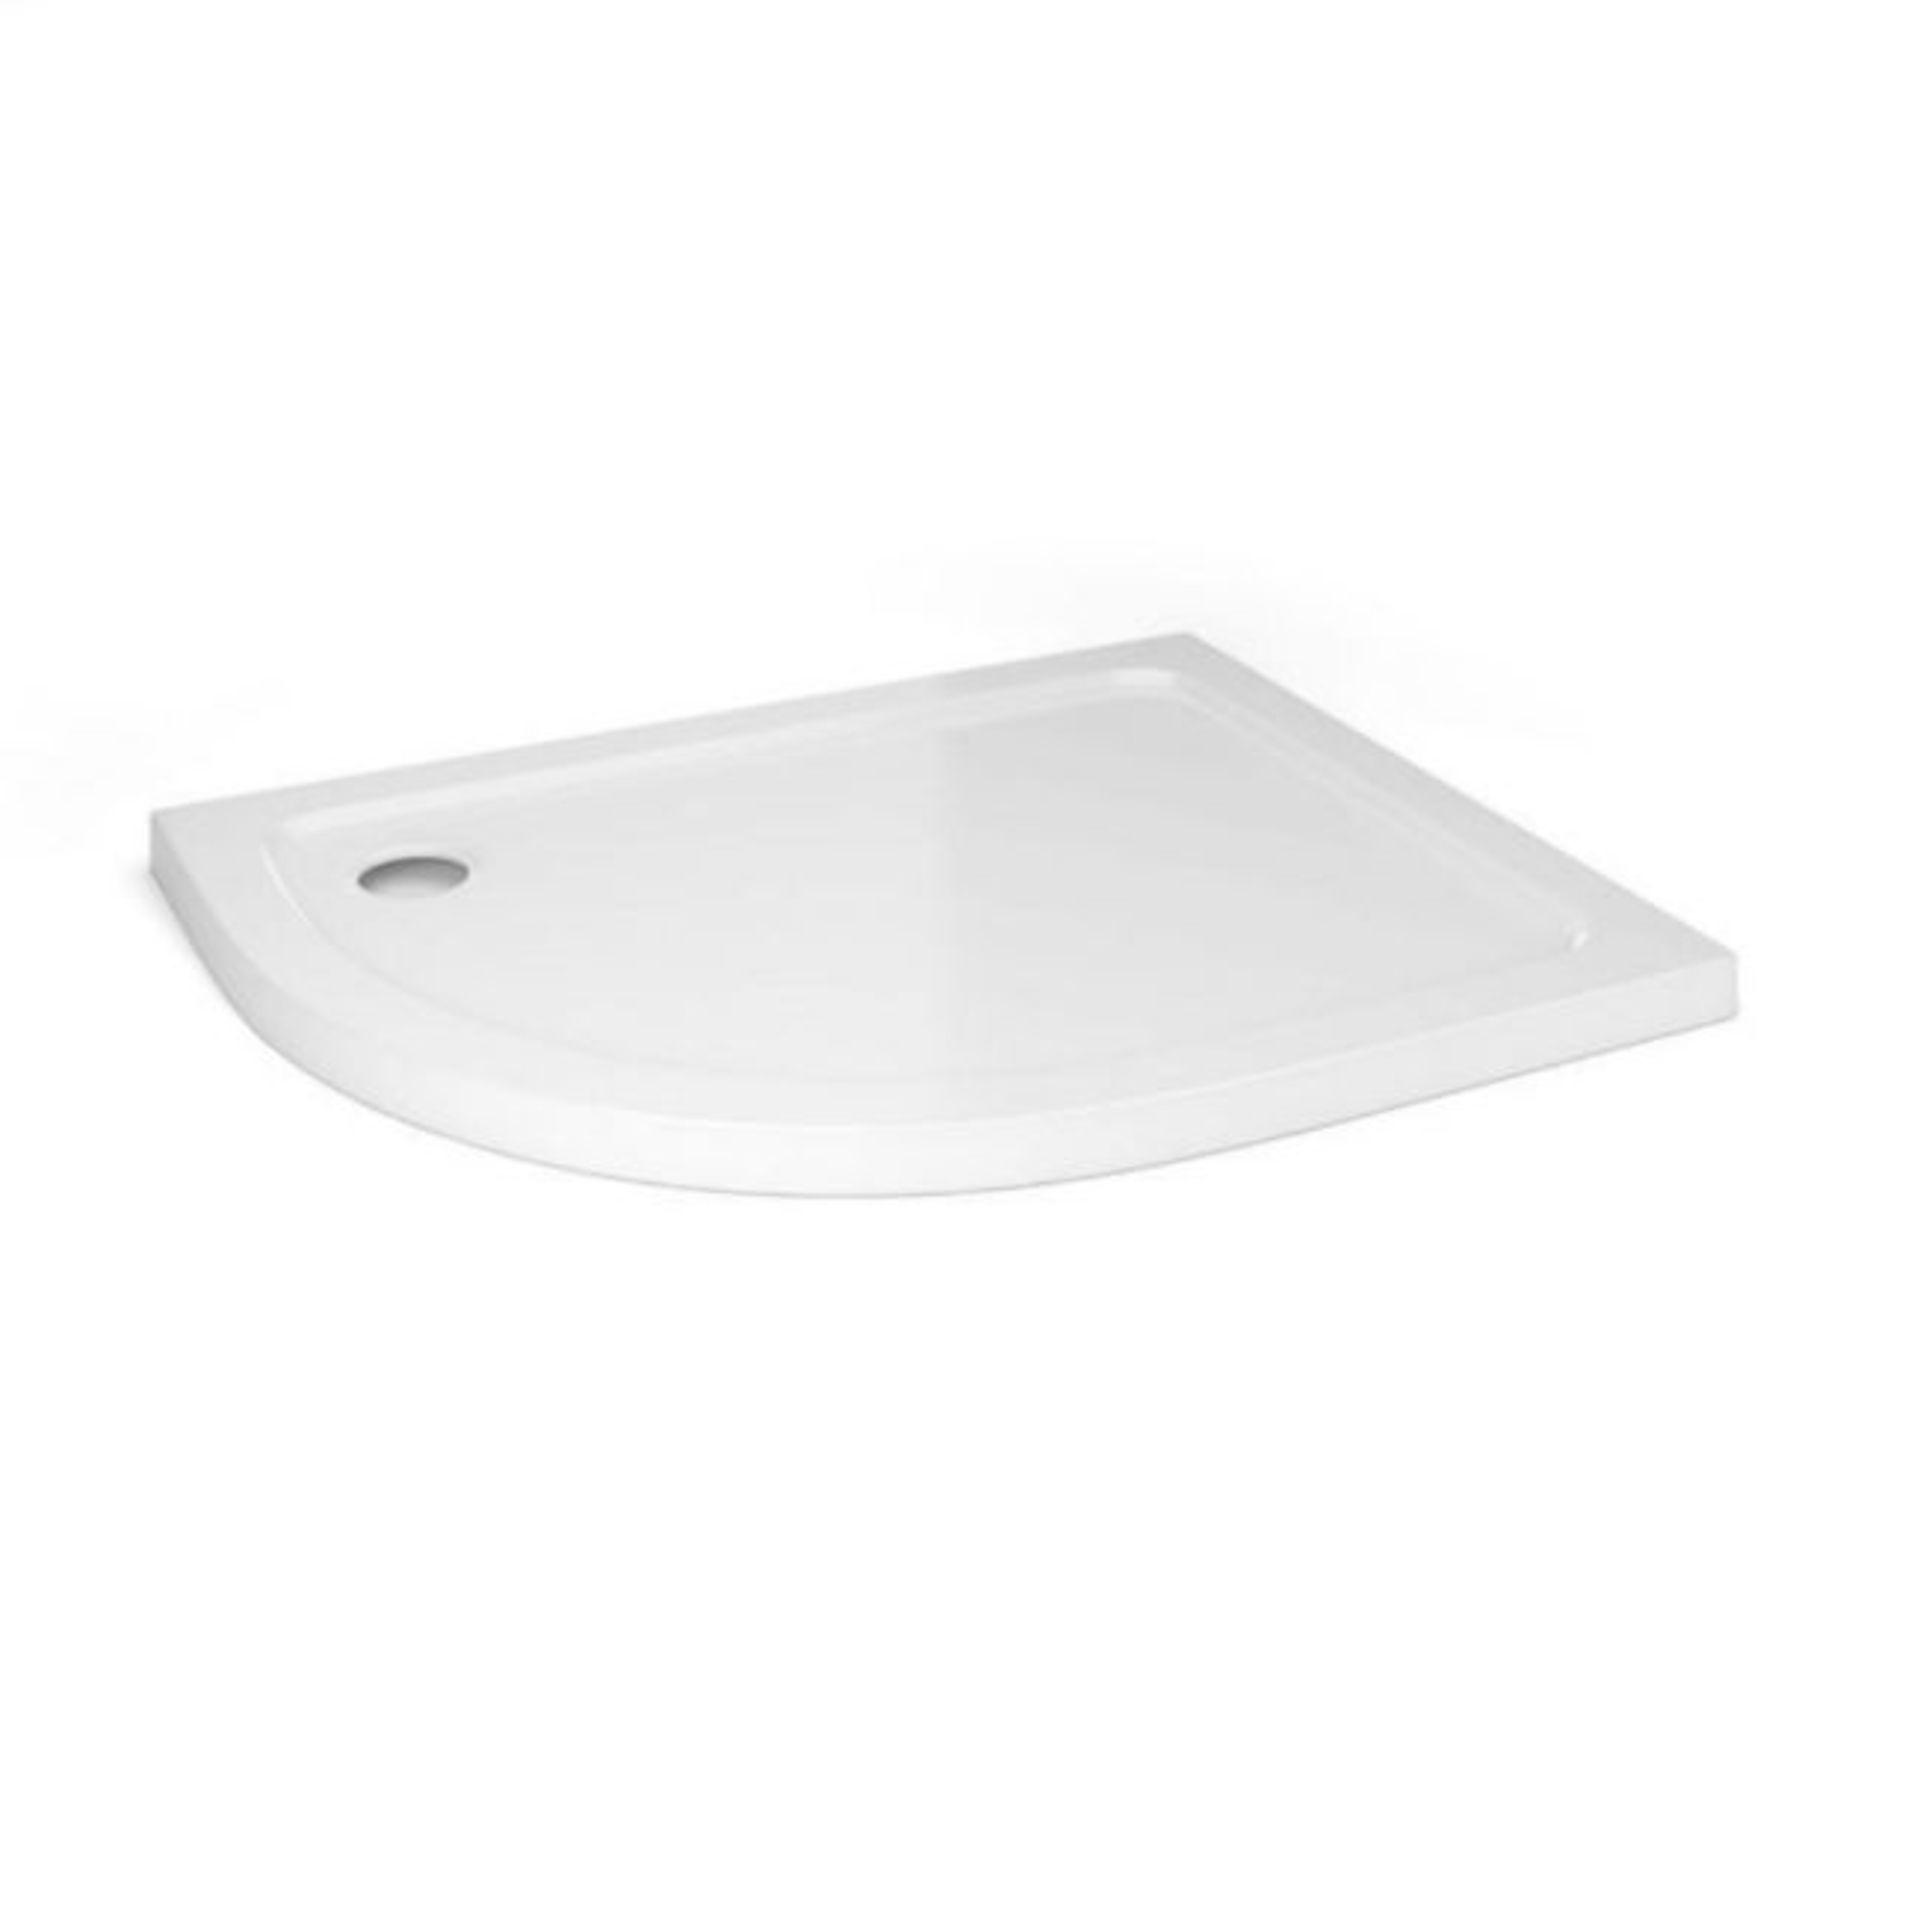 (VD124) 1000x800mm Offset Quadrant Ultra Slim Stone Shower Tray - Left.RRP £304.99.Constructed... - Image 2 of 2